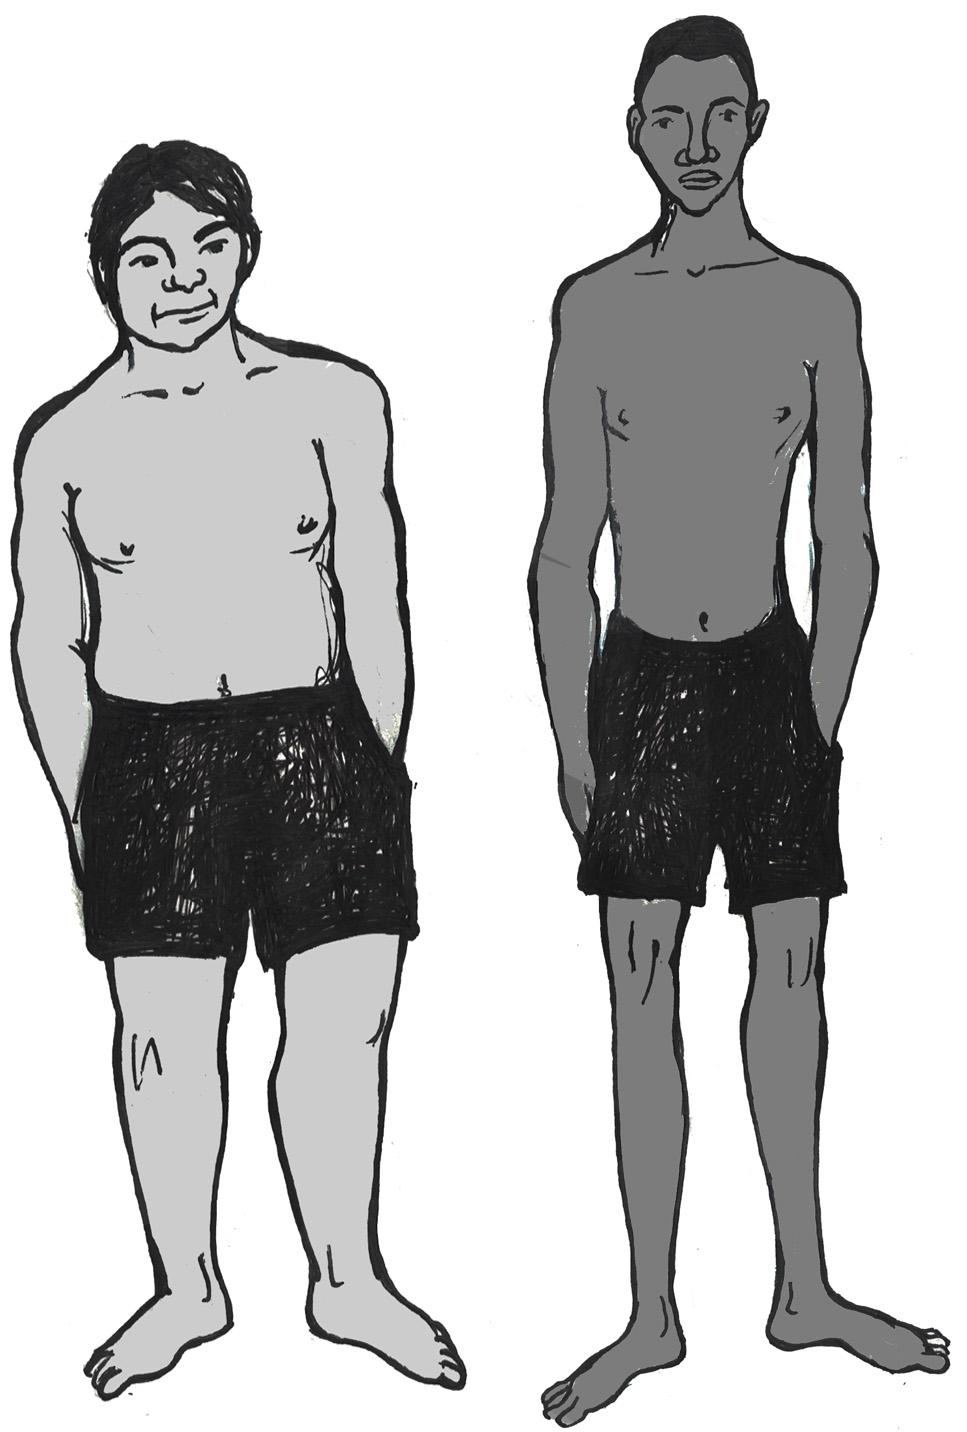 Person on left is stocky, person on right has a narrow body breadth.